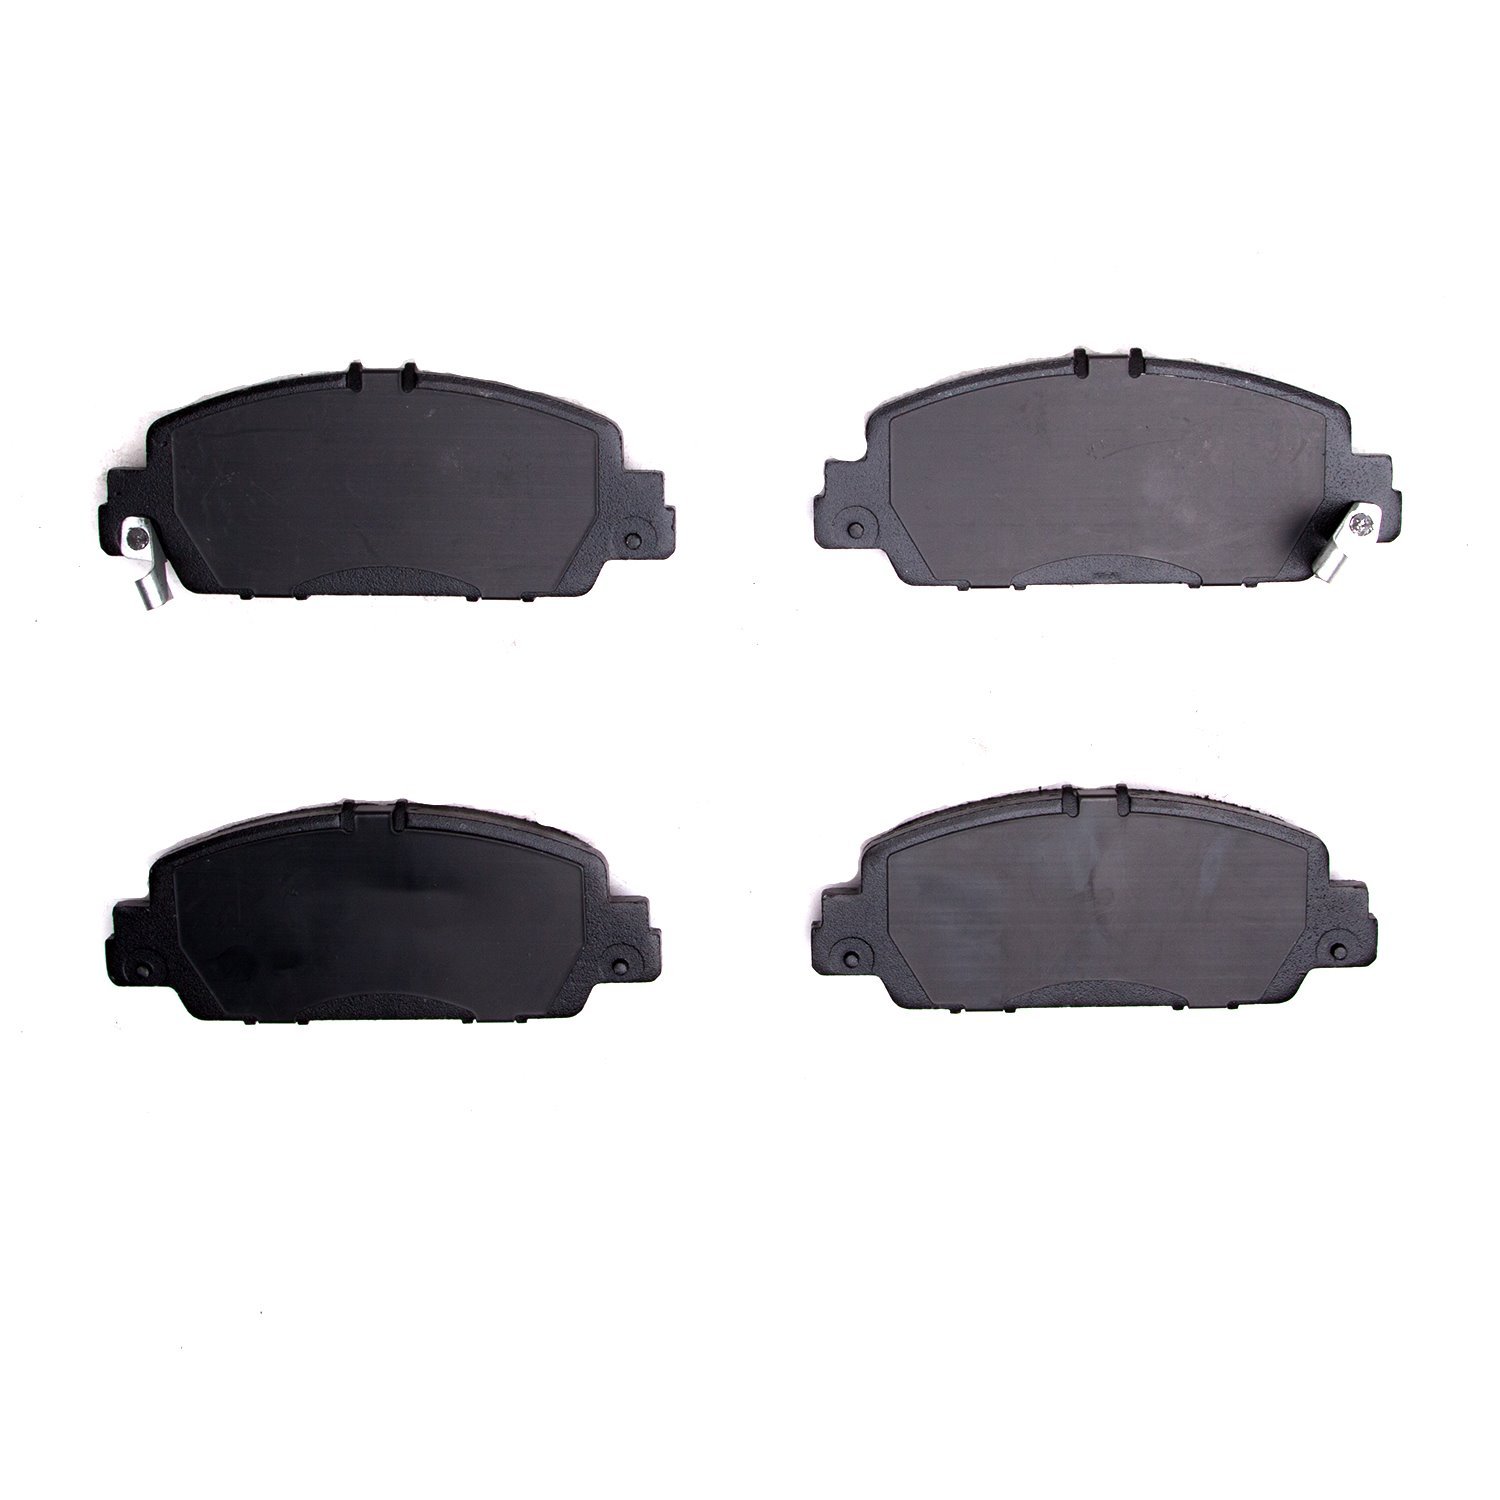 1310-1654-00 3000-Series Ceramic Brake Pads, Fits Select Acura/Honda, Position: Front